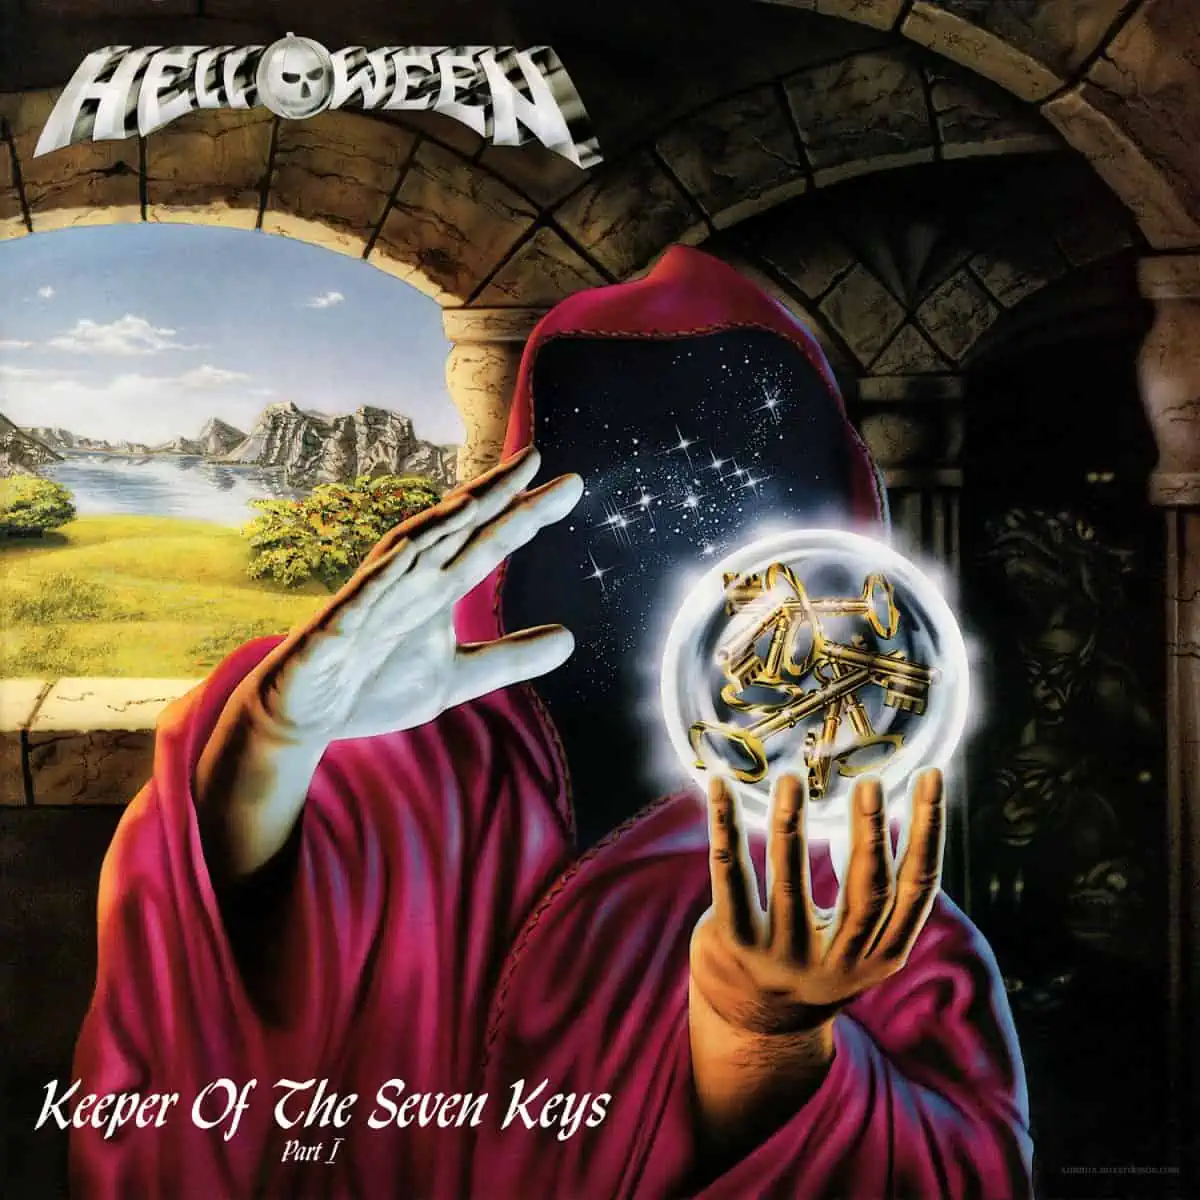 You are currently viewing Helloween – “Keeper of the Seven Keys Part I” 36 years since the first part of an amazing story